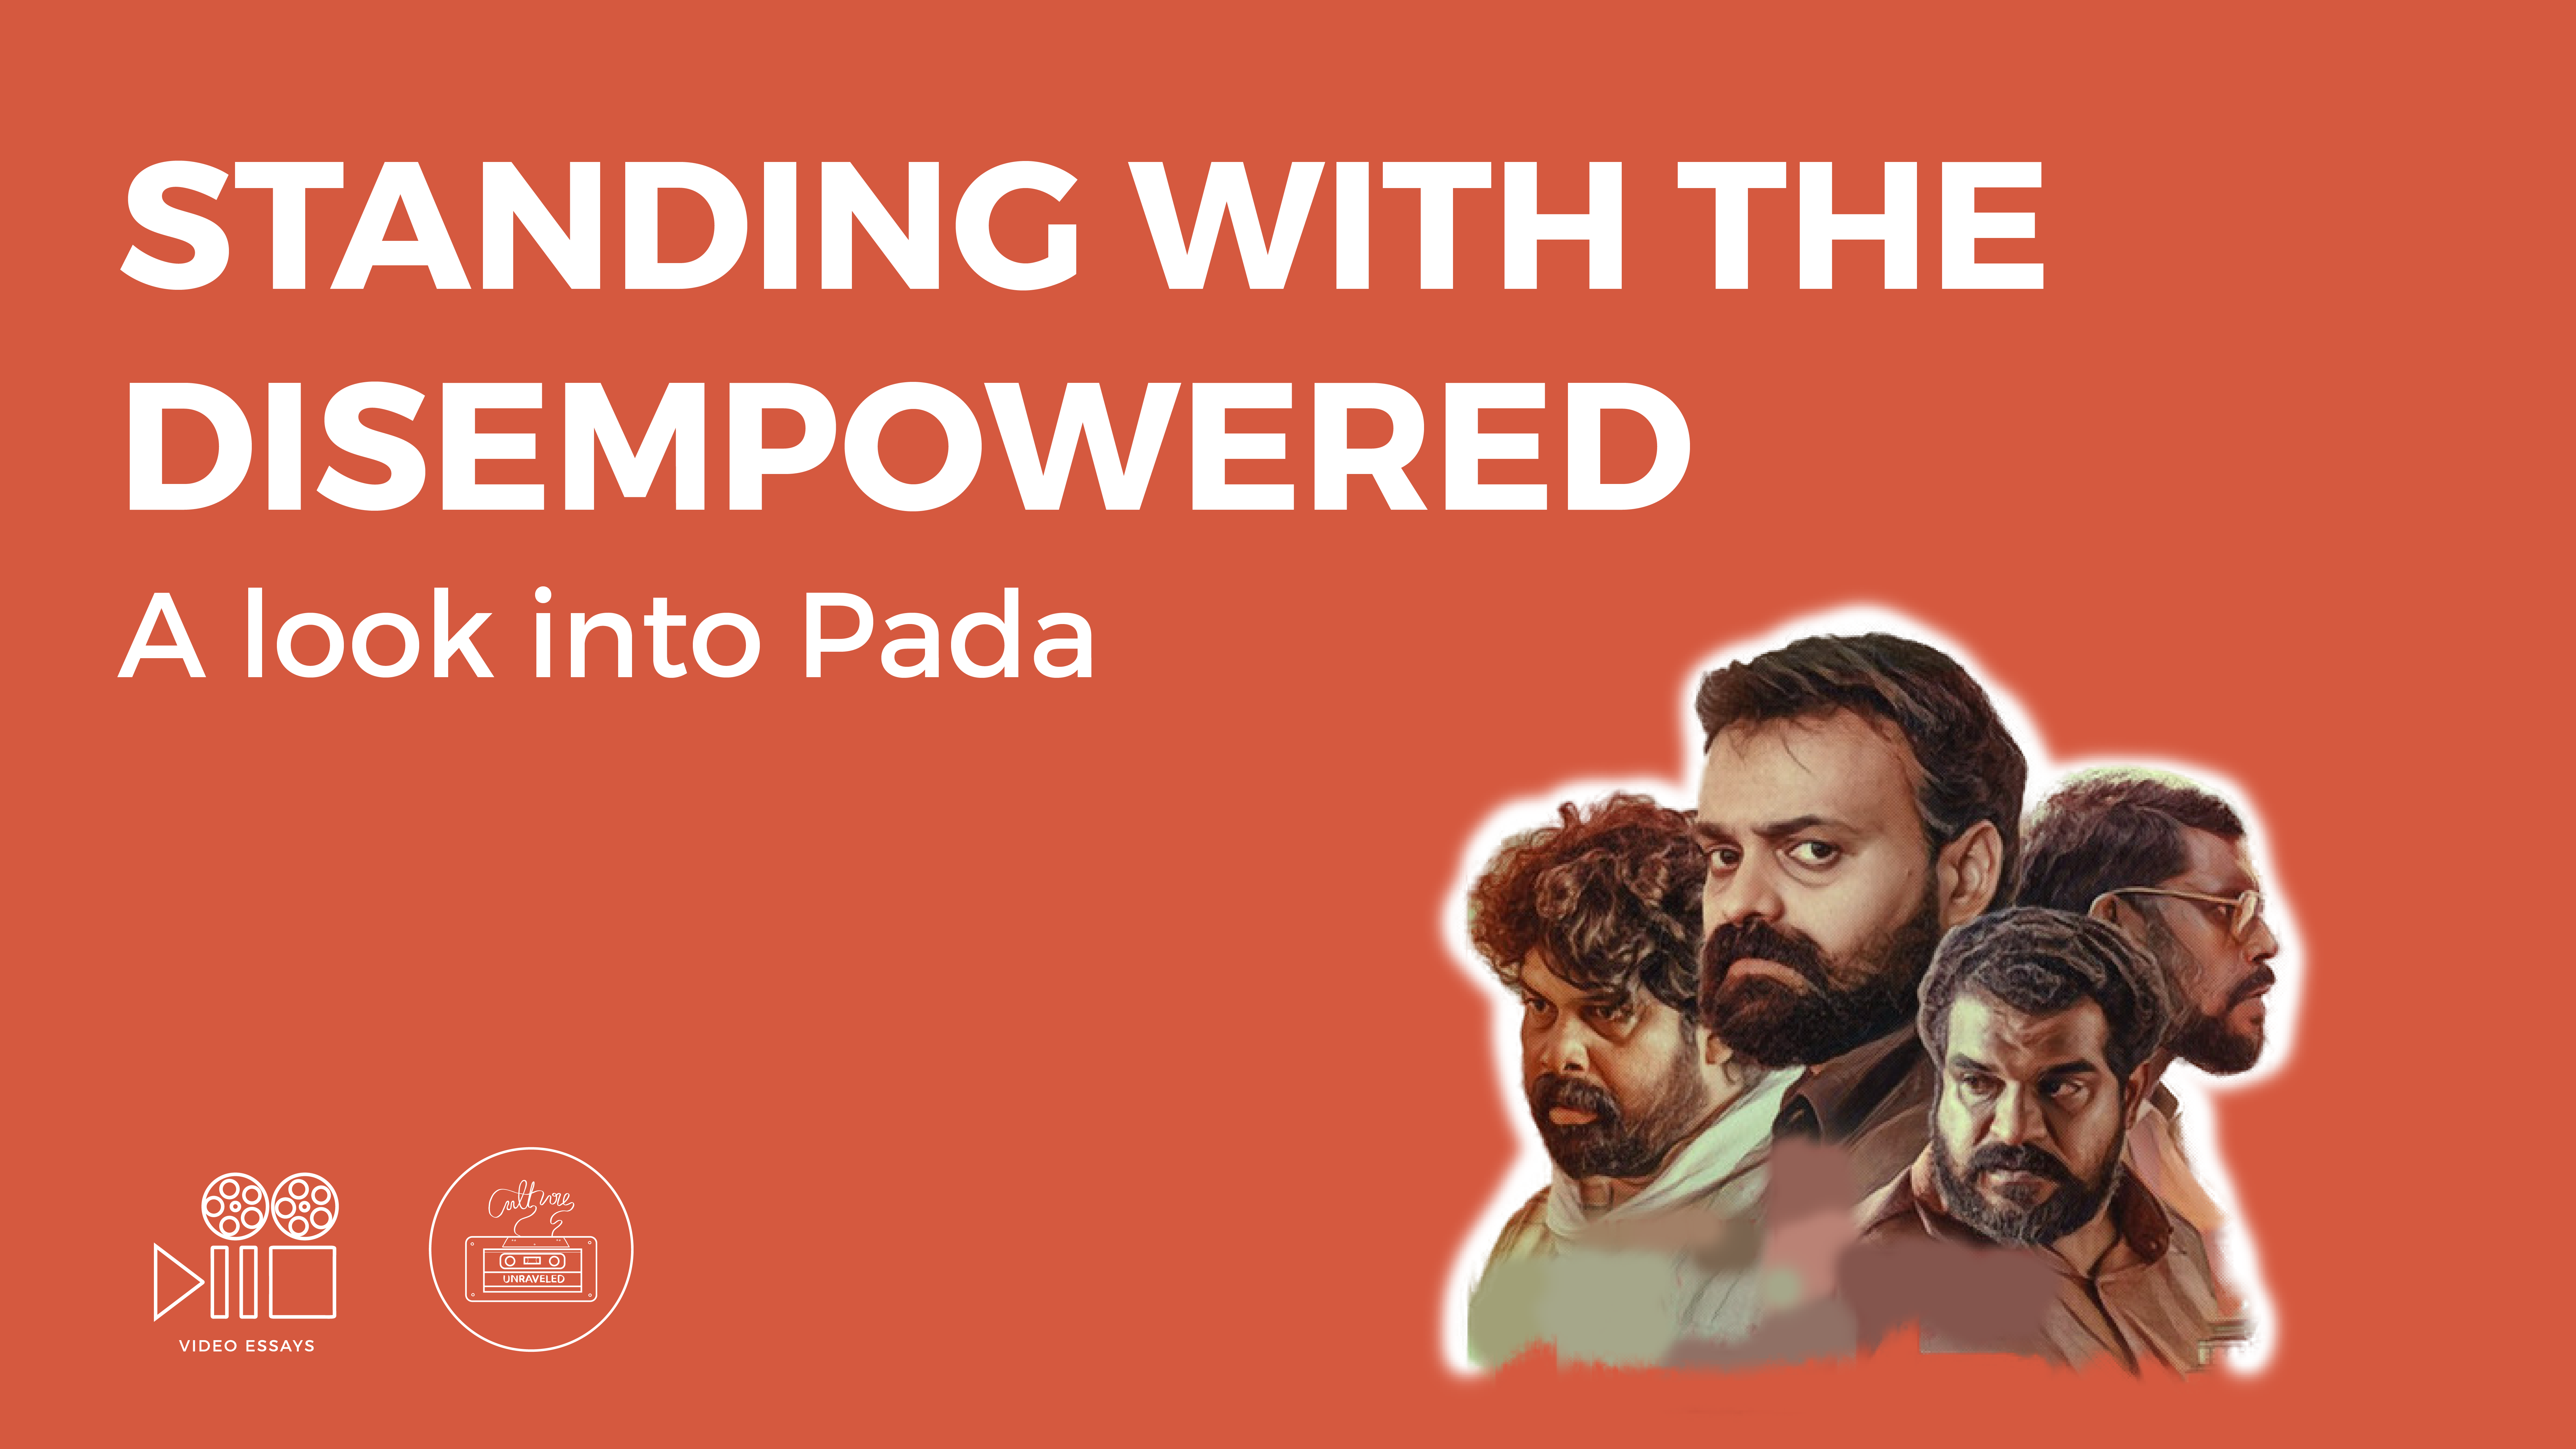 Standing with the disempowered. A Look into Pada